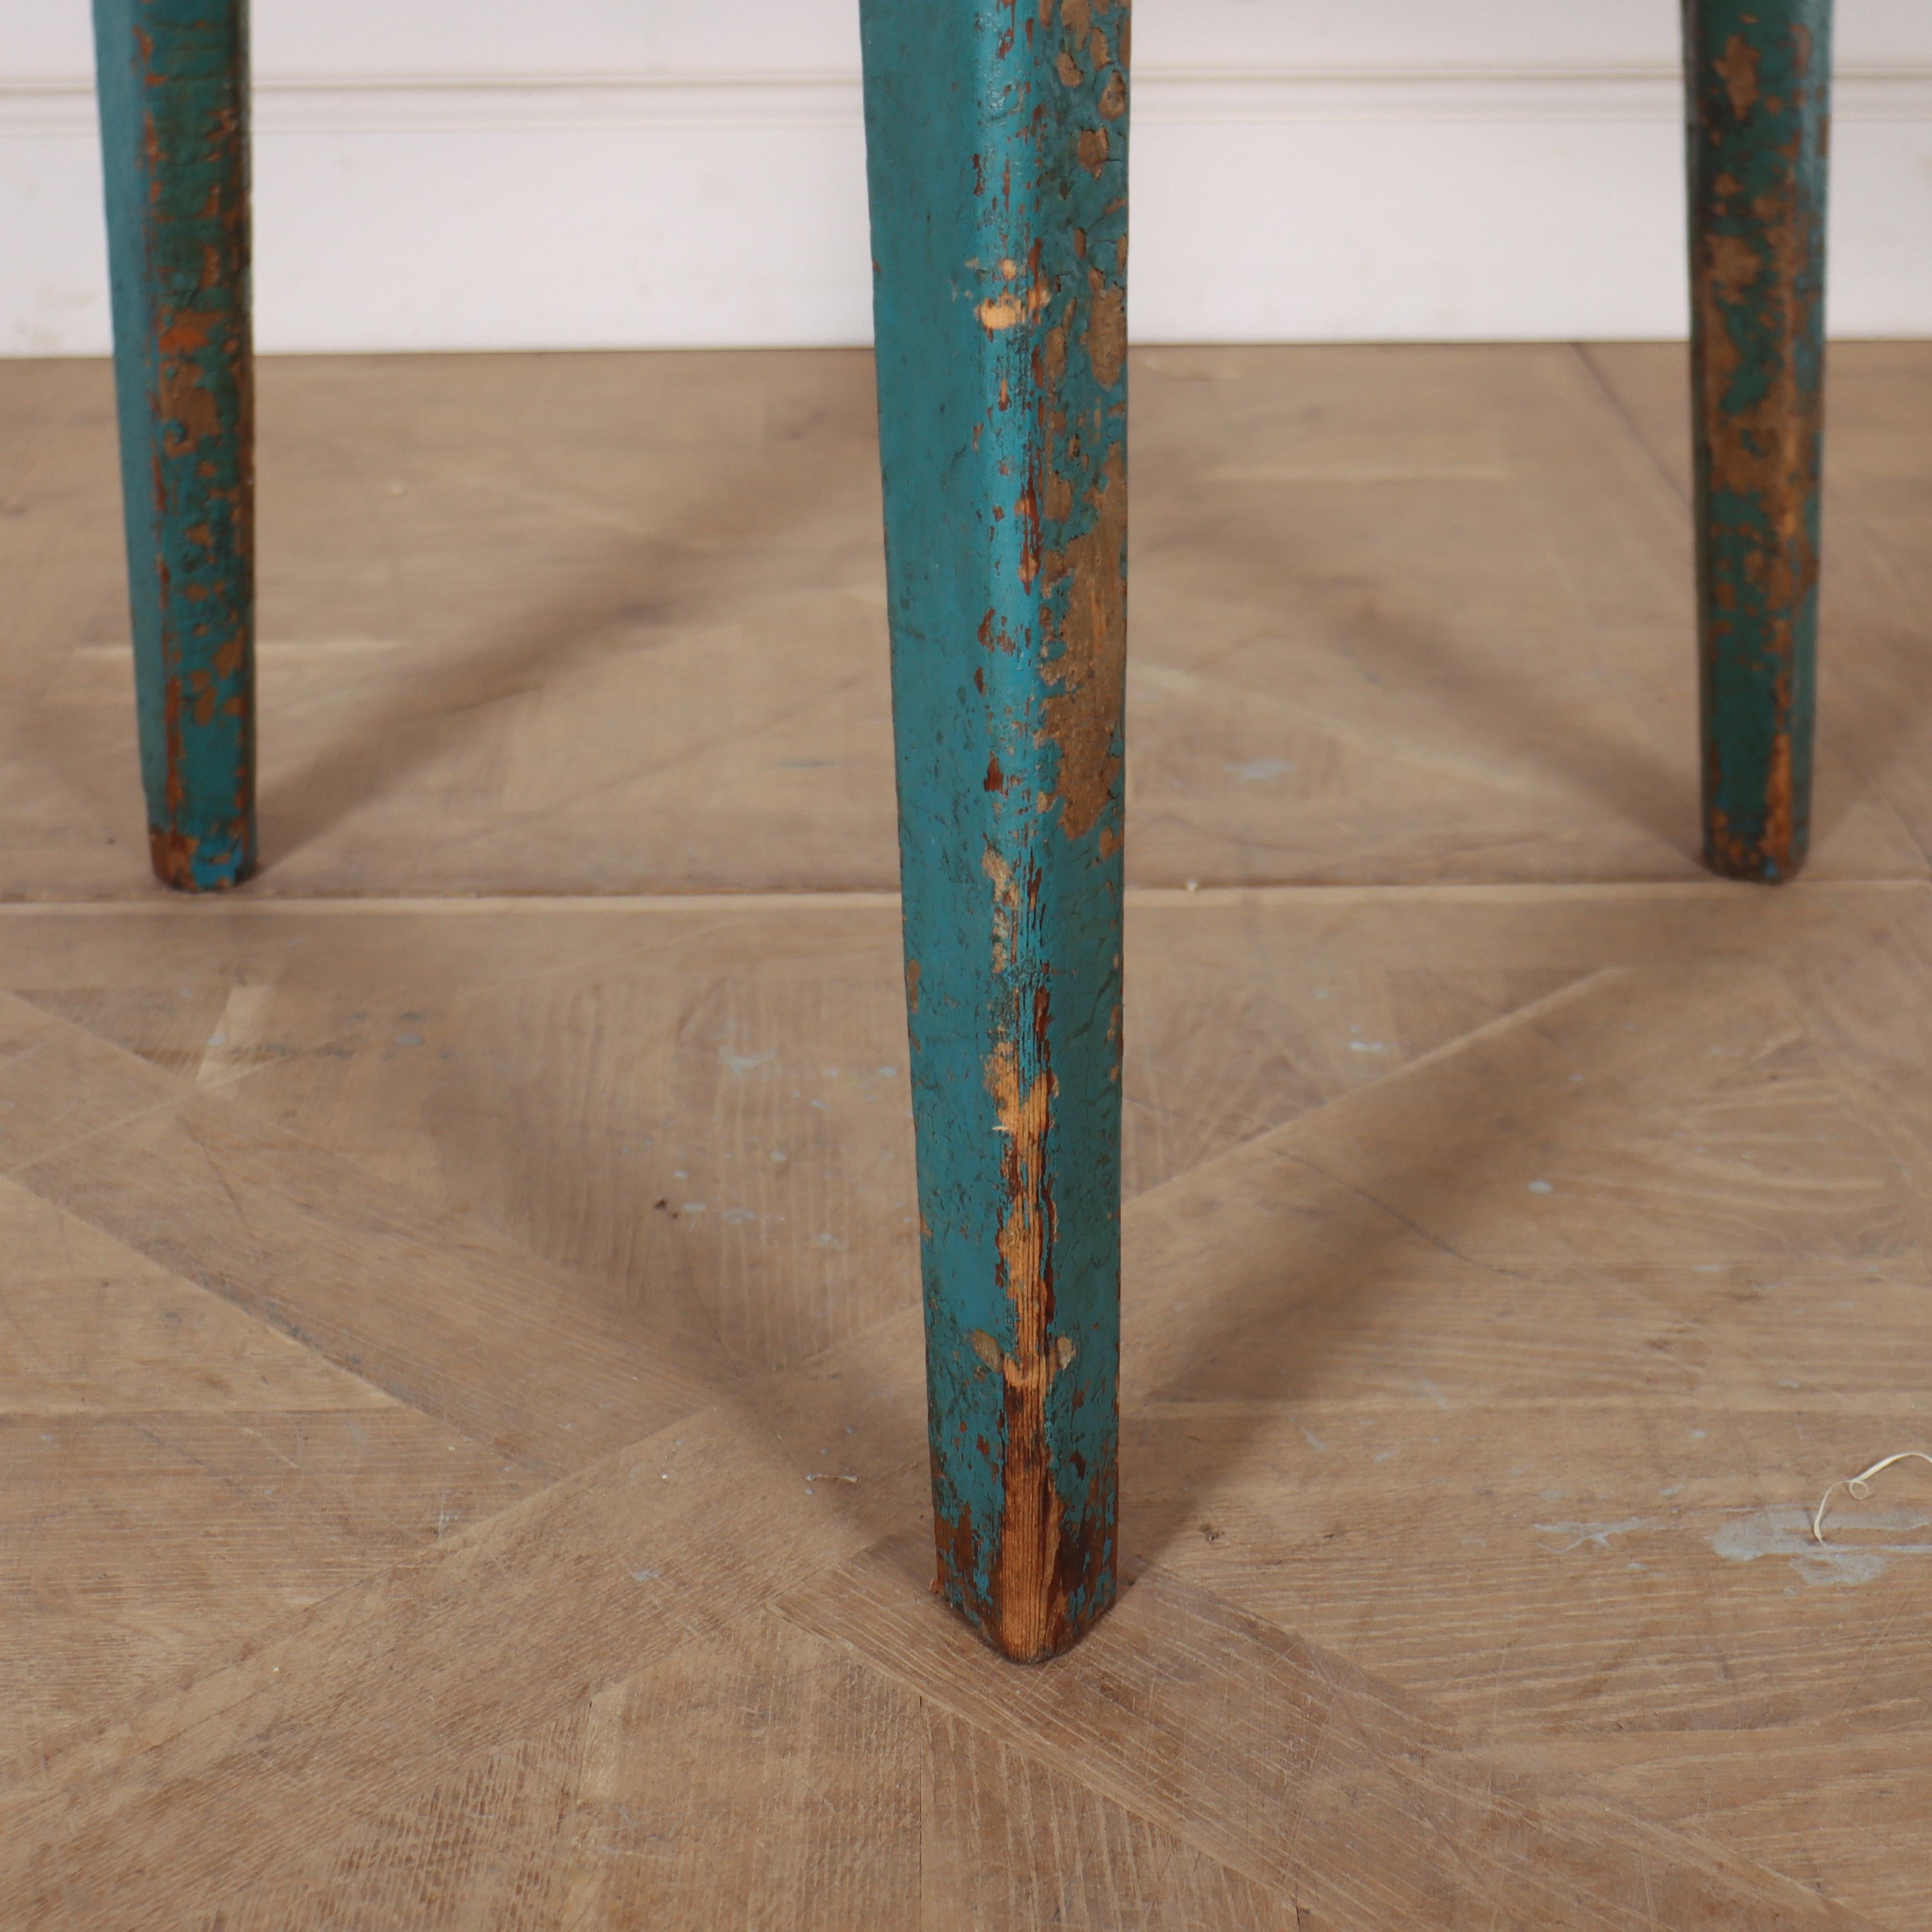 Welsh Original Painted Cricket Table In Good Condition For Sale In Leamington Spa, Warwickshire